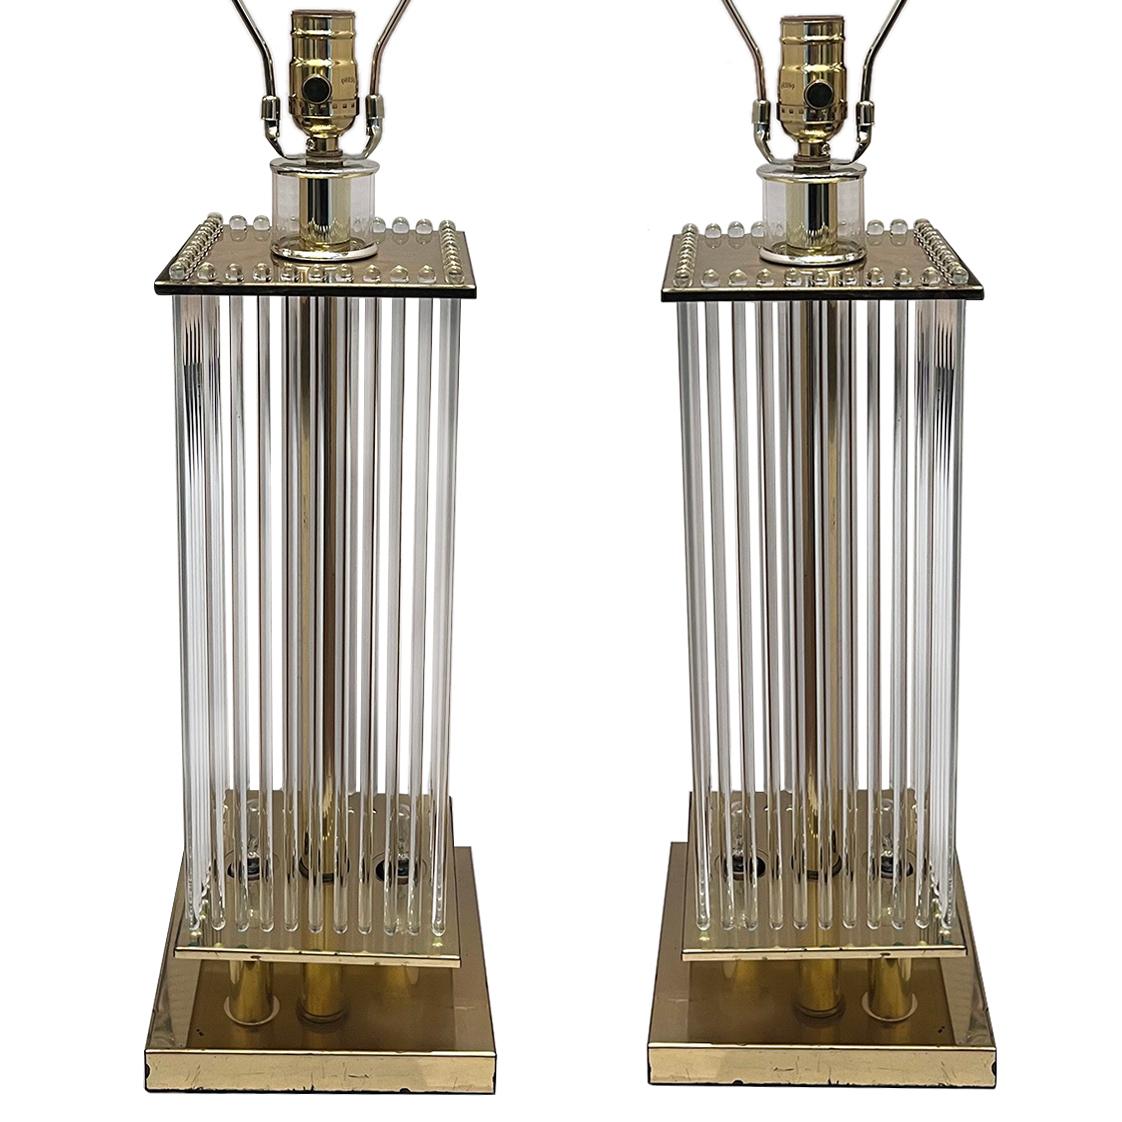 A Pair of circa 1960s' Italian glass rod moderne lamps.

Measurements:
Height of body: 19